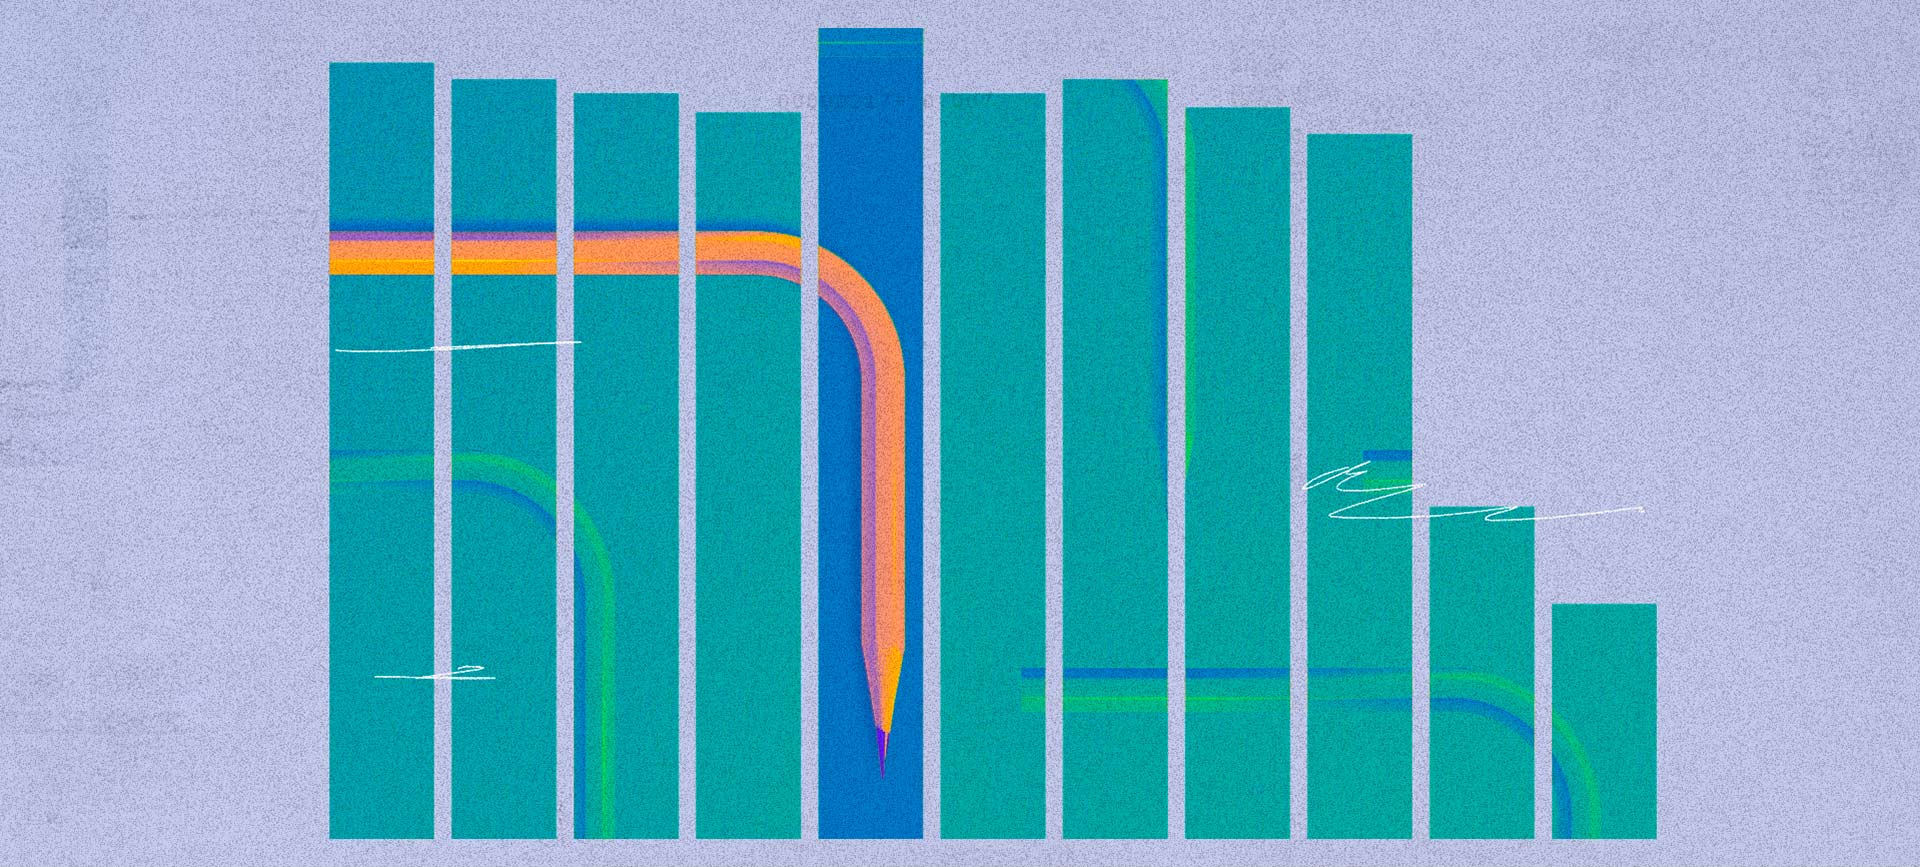 A pencil bends downward in the middle of a blue column on a green bar graph.